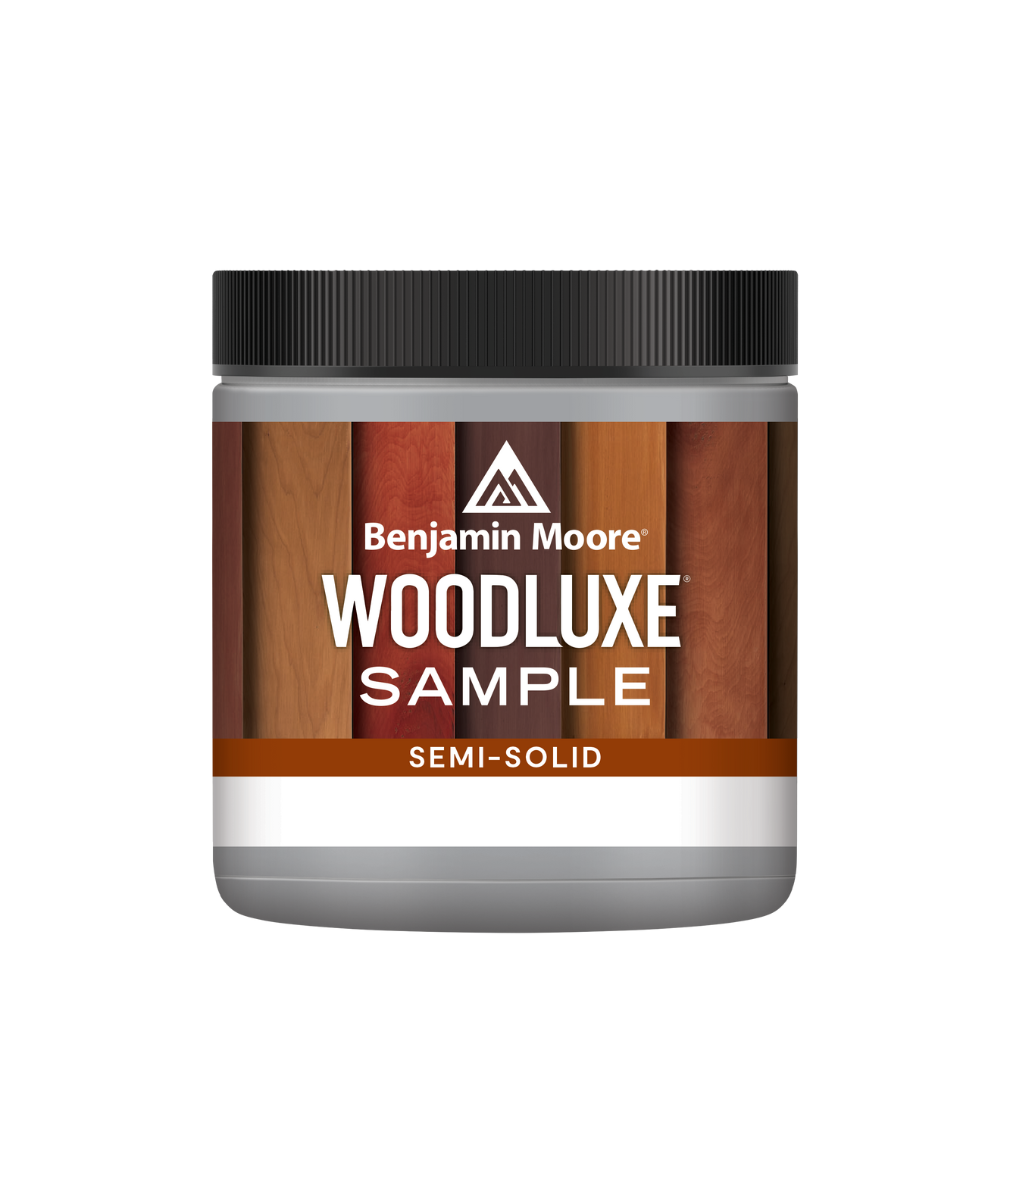 Benjamin Moore Woodluxe® Water-Based Semi-Solid Exterior Stain available at Catalina Paints in Los Angeles County.